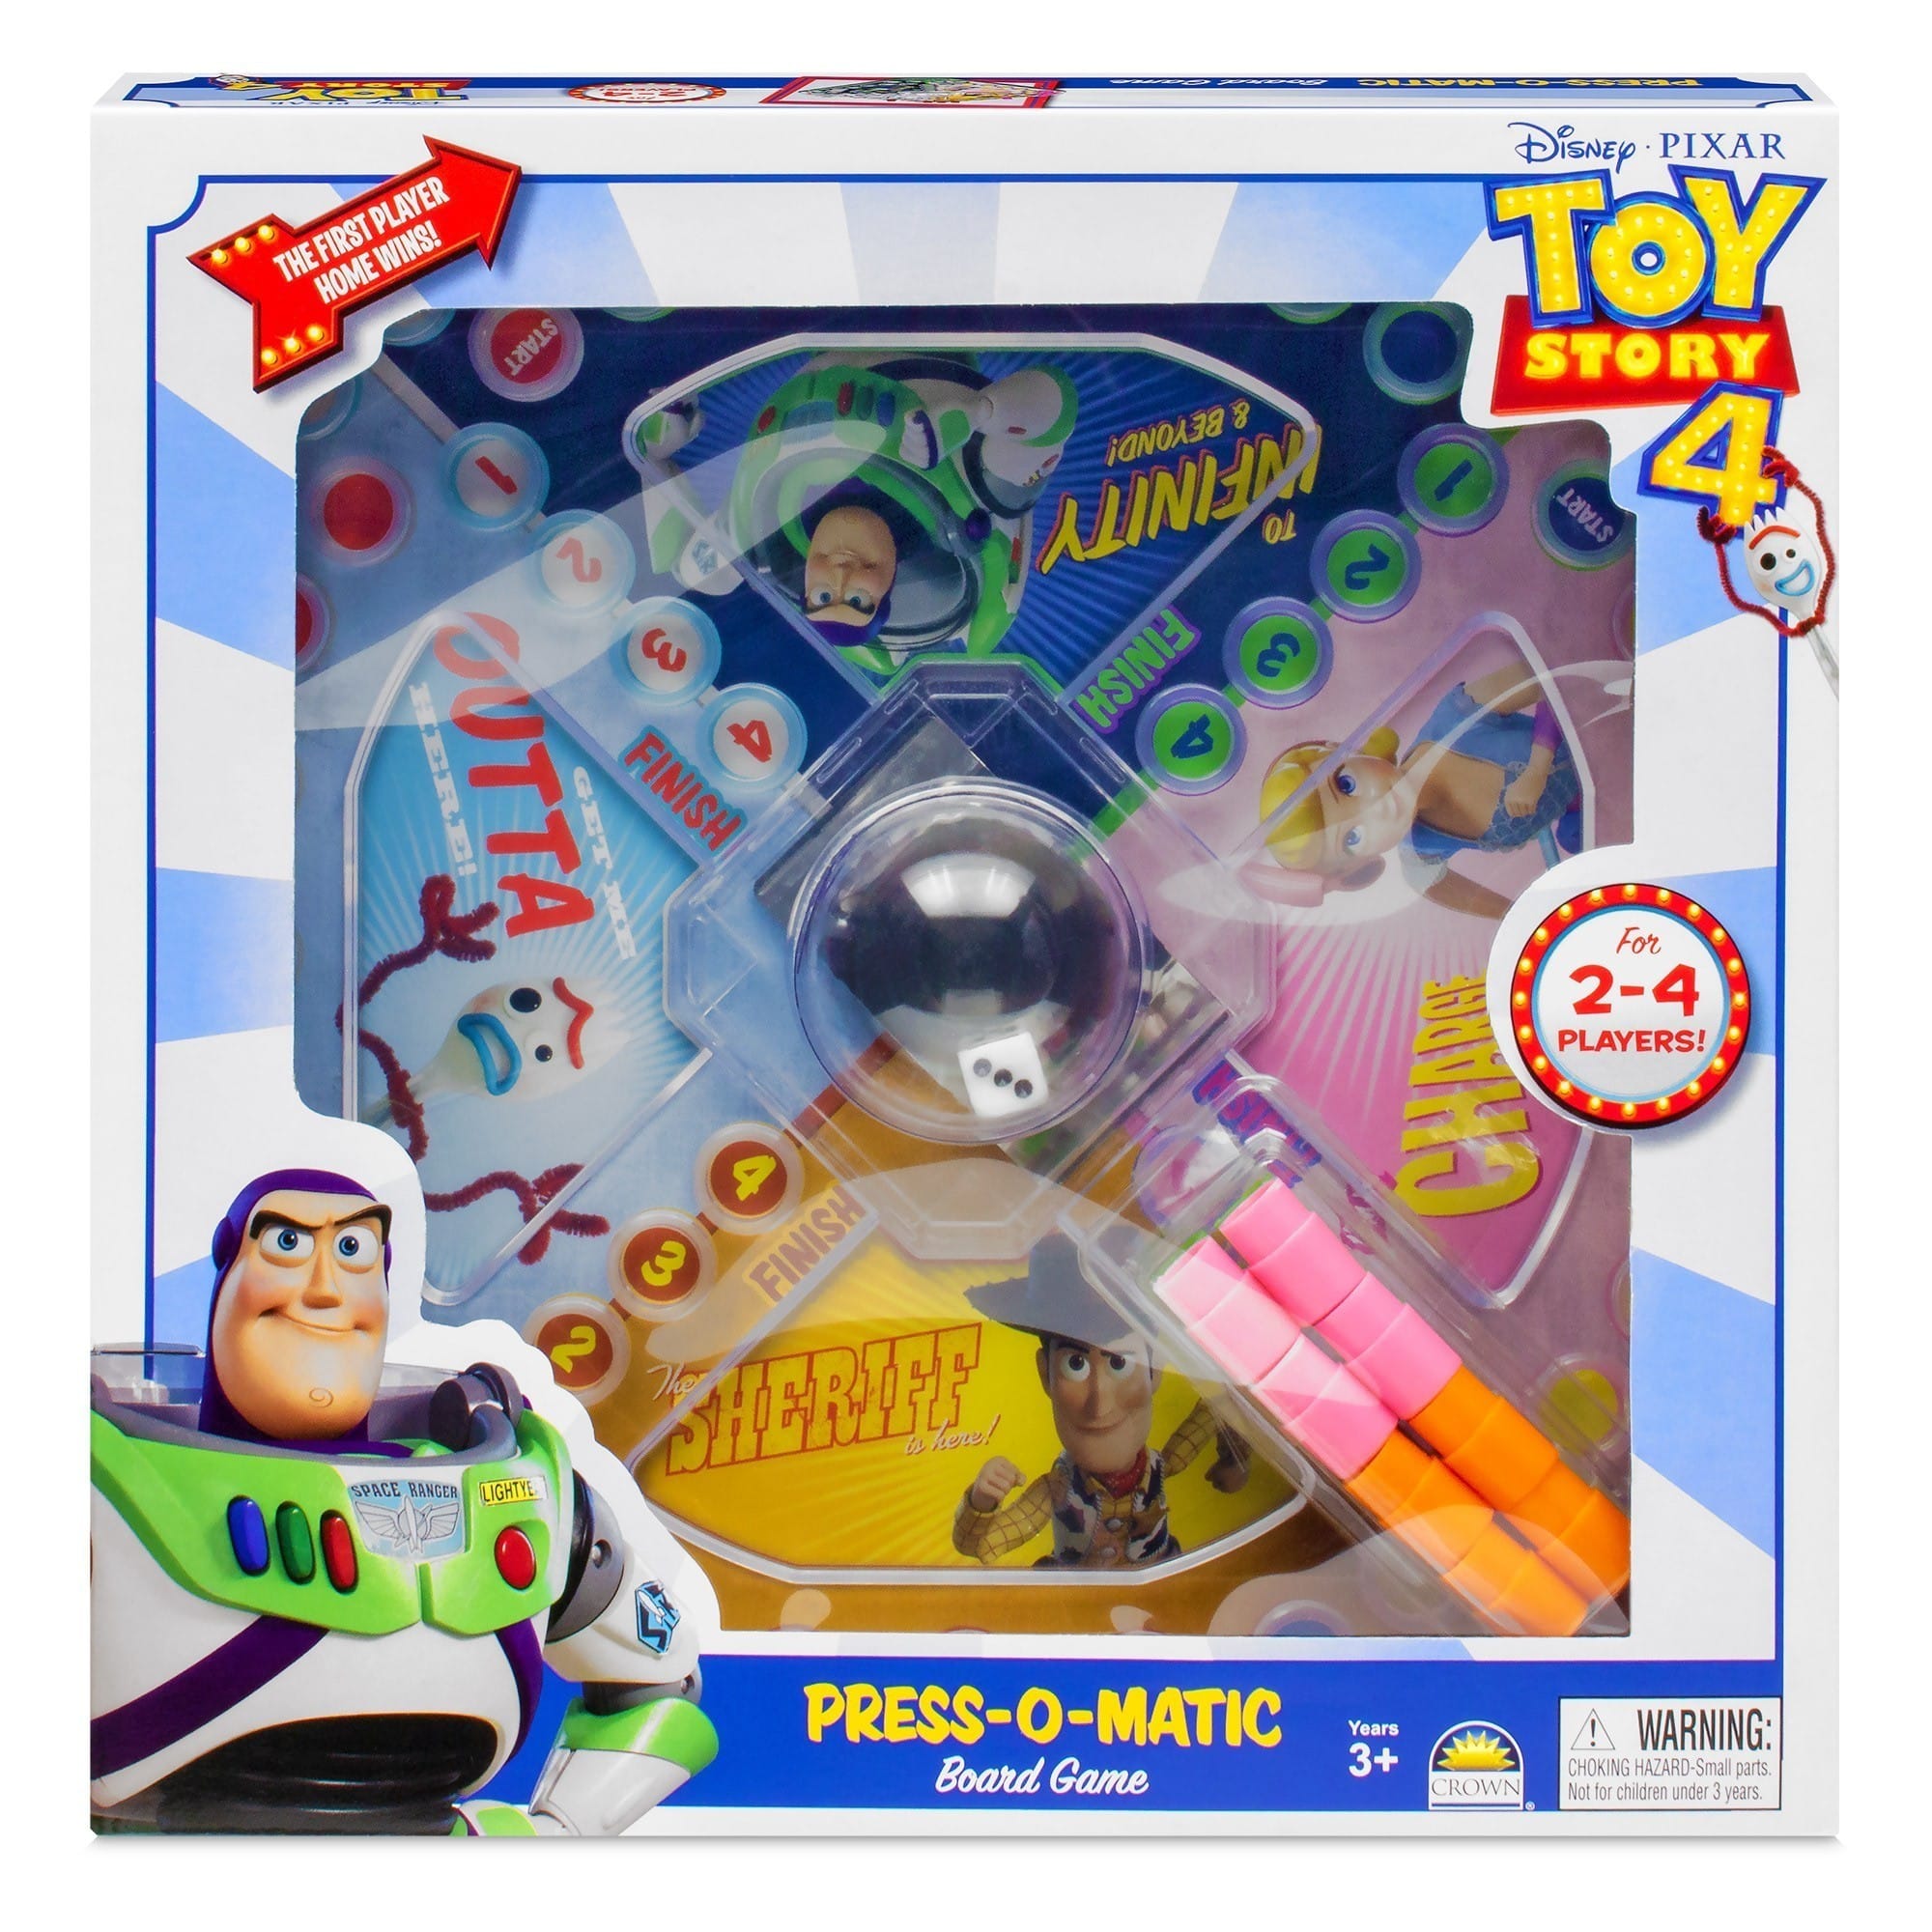 Toy Story 4 - Press-O-Matic Game